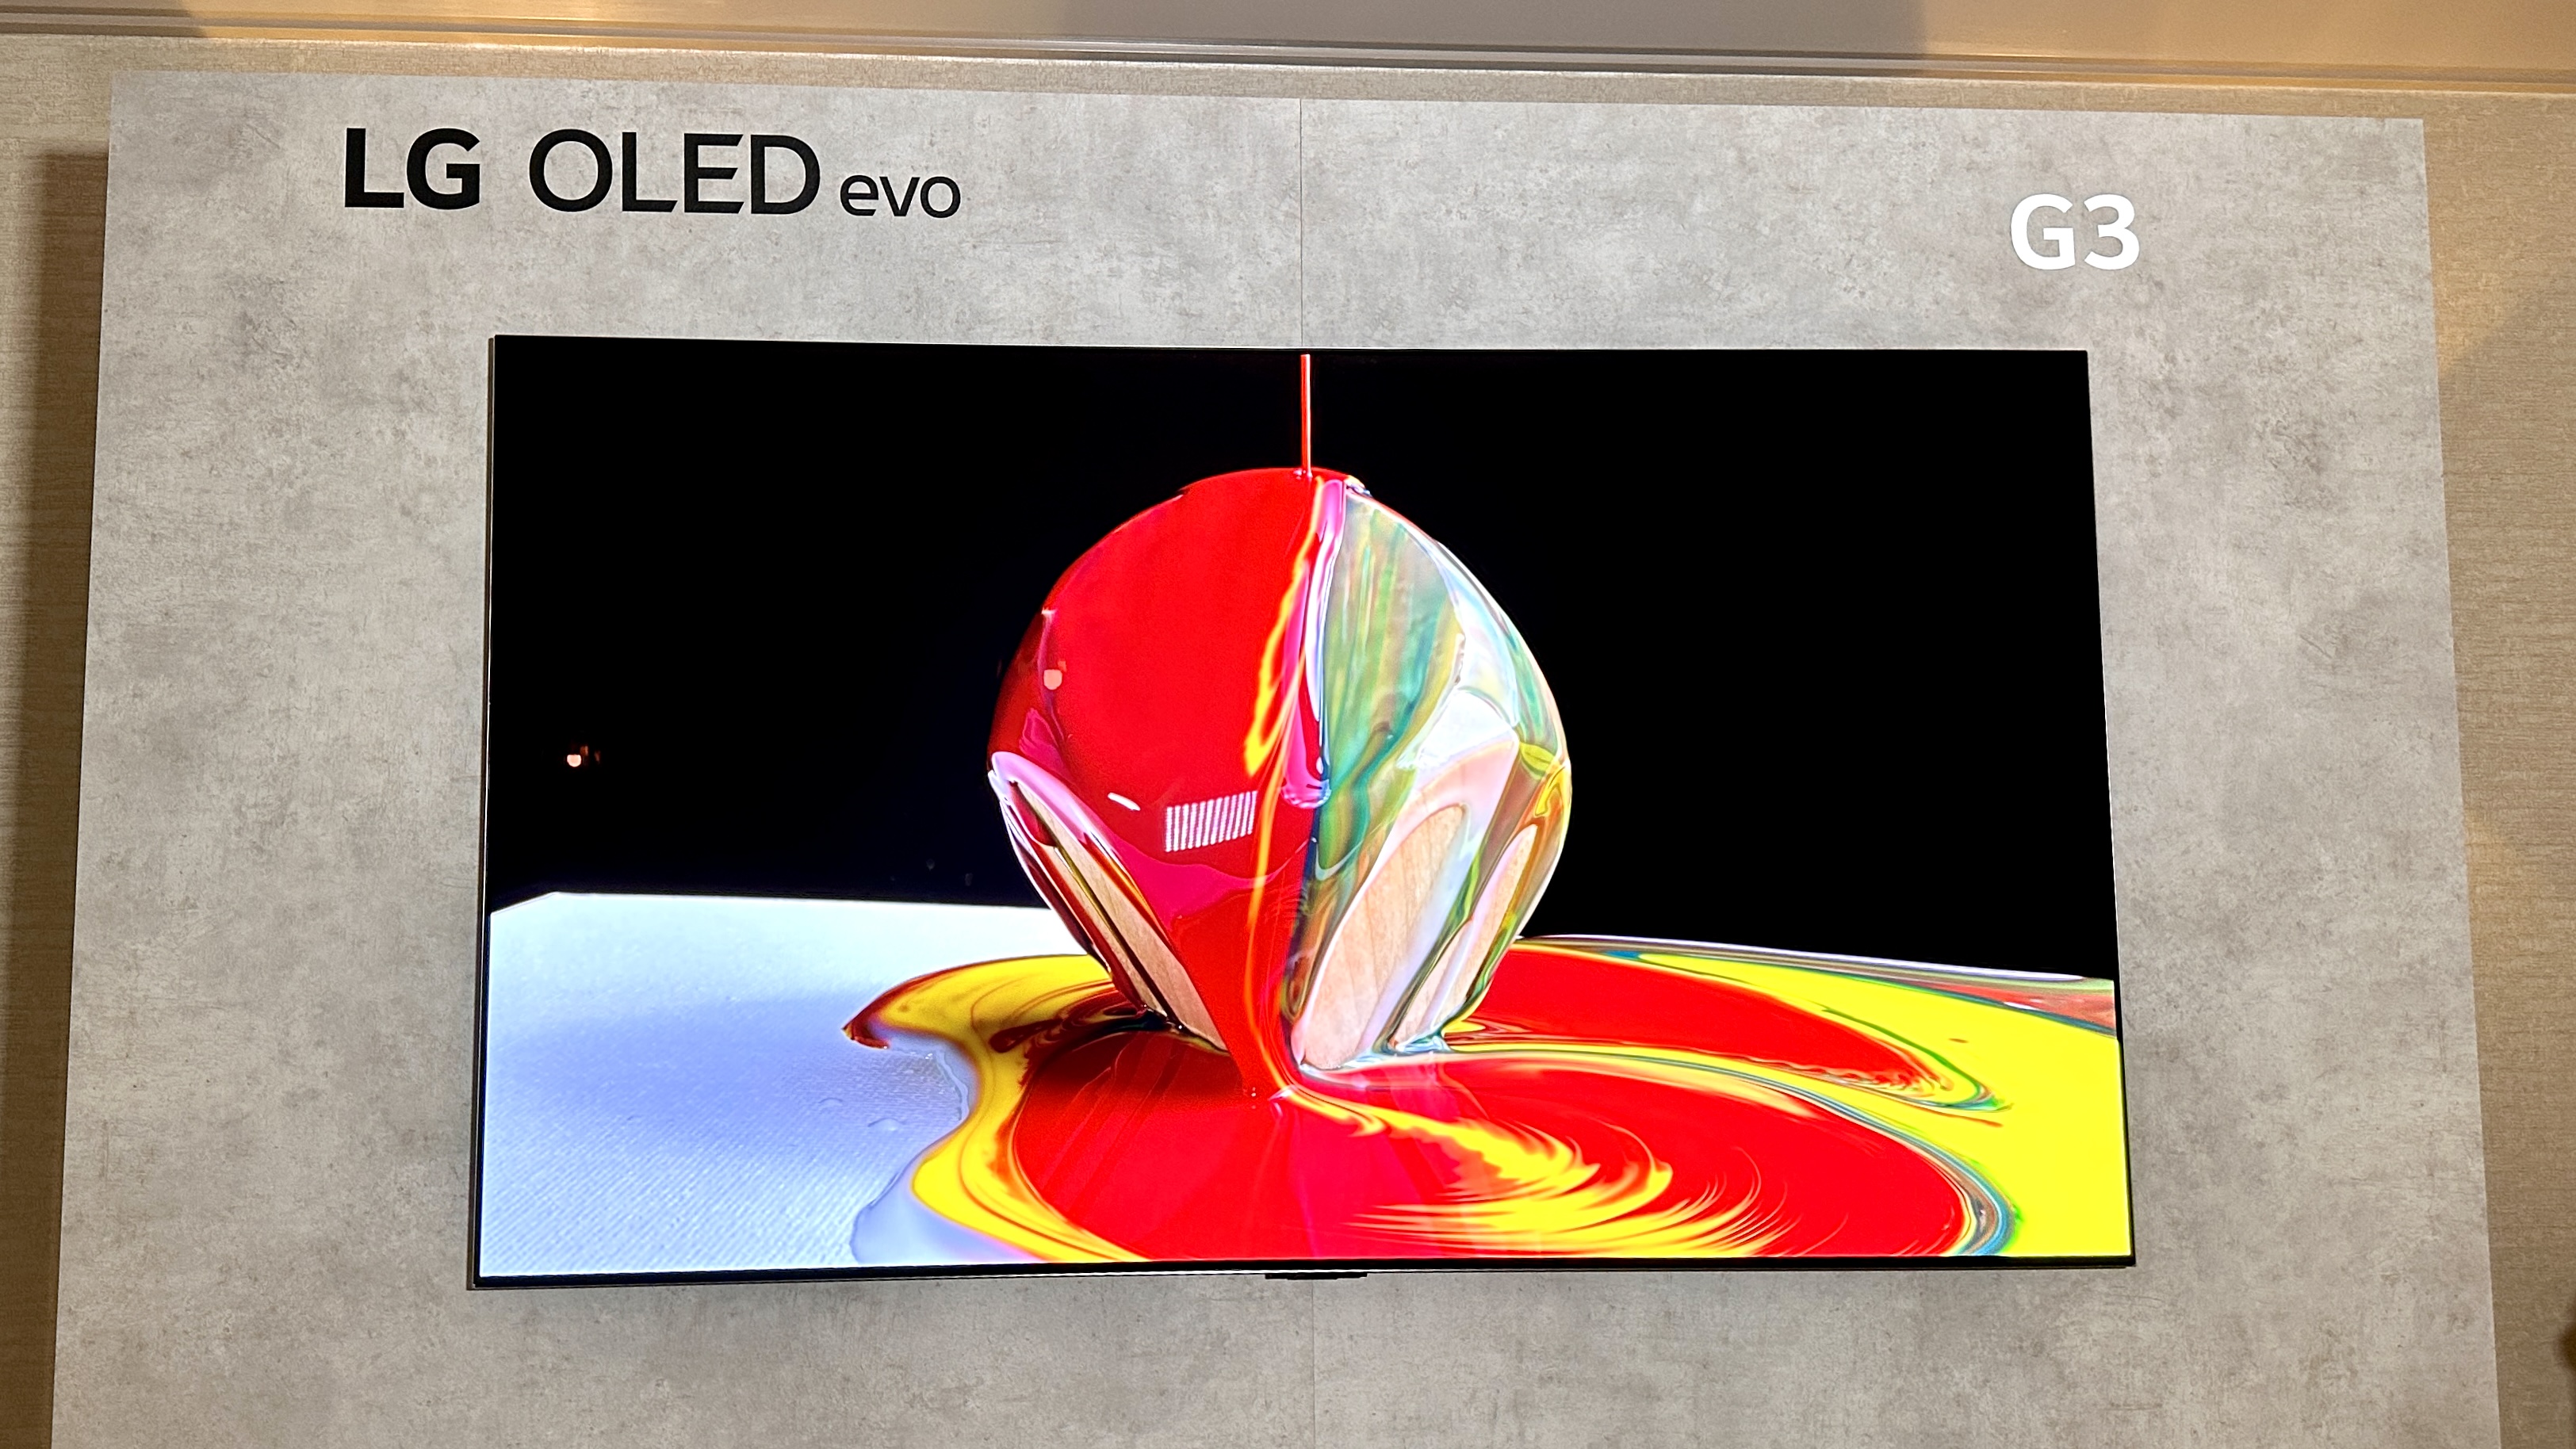 The LG G3 OLED TV mounted on a wall, showing paint falling on an object